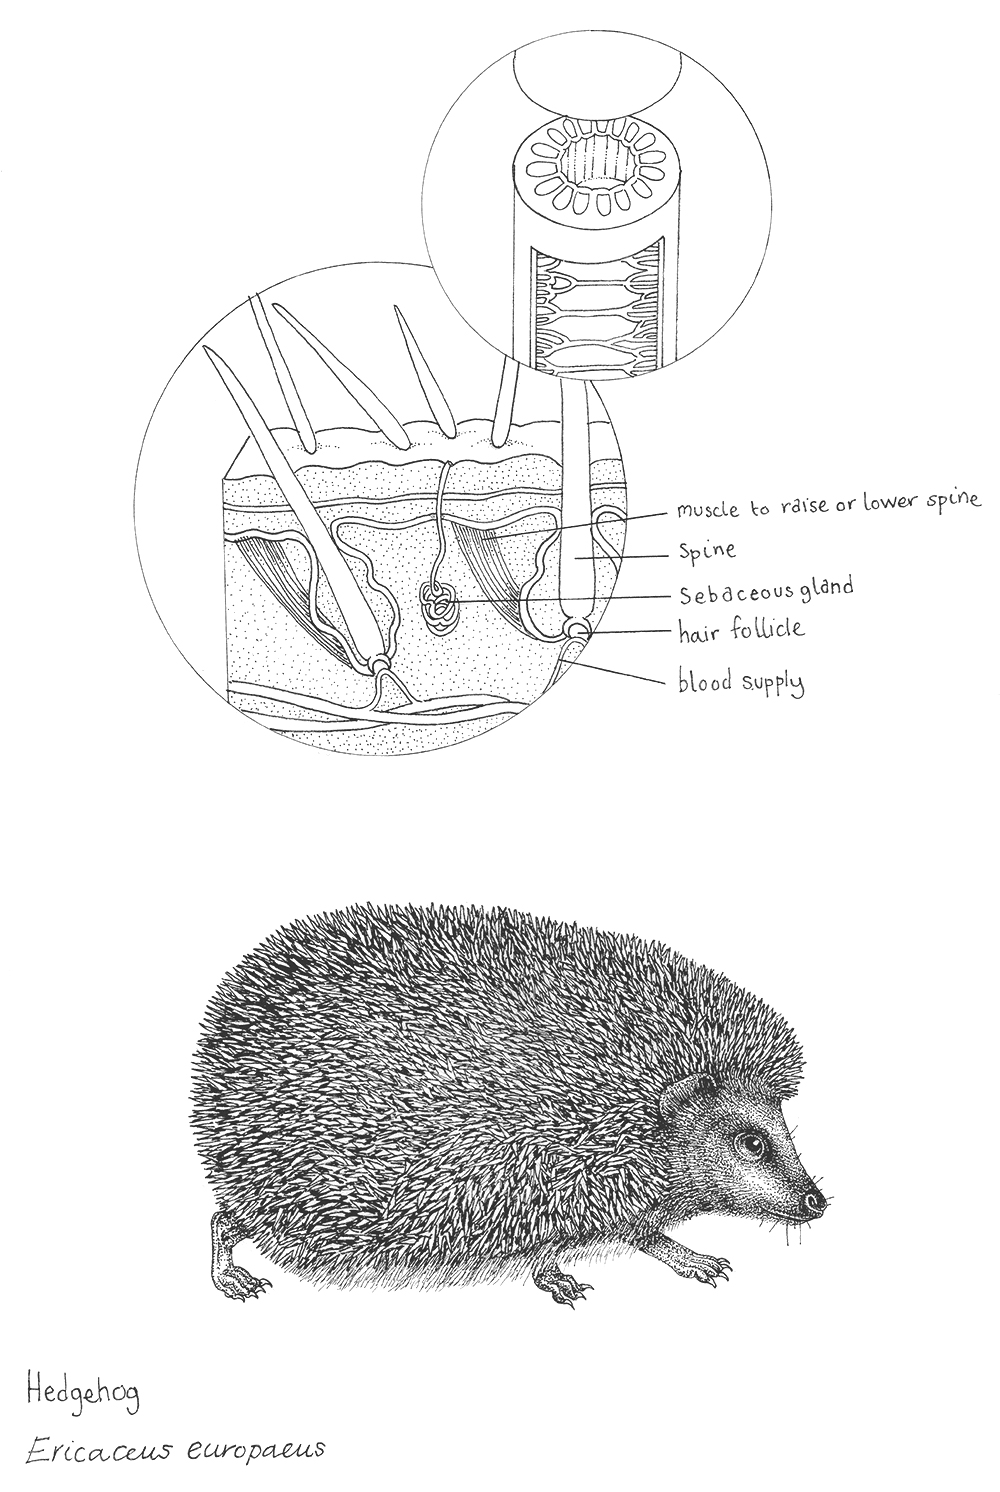 An intricate illustration of a hedgehog from the book 30 Animals That Made Us Smarter